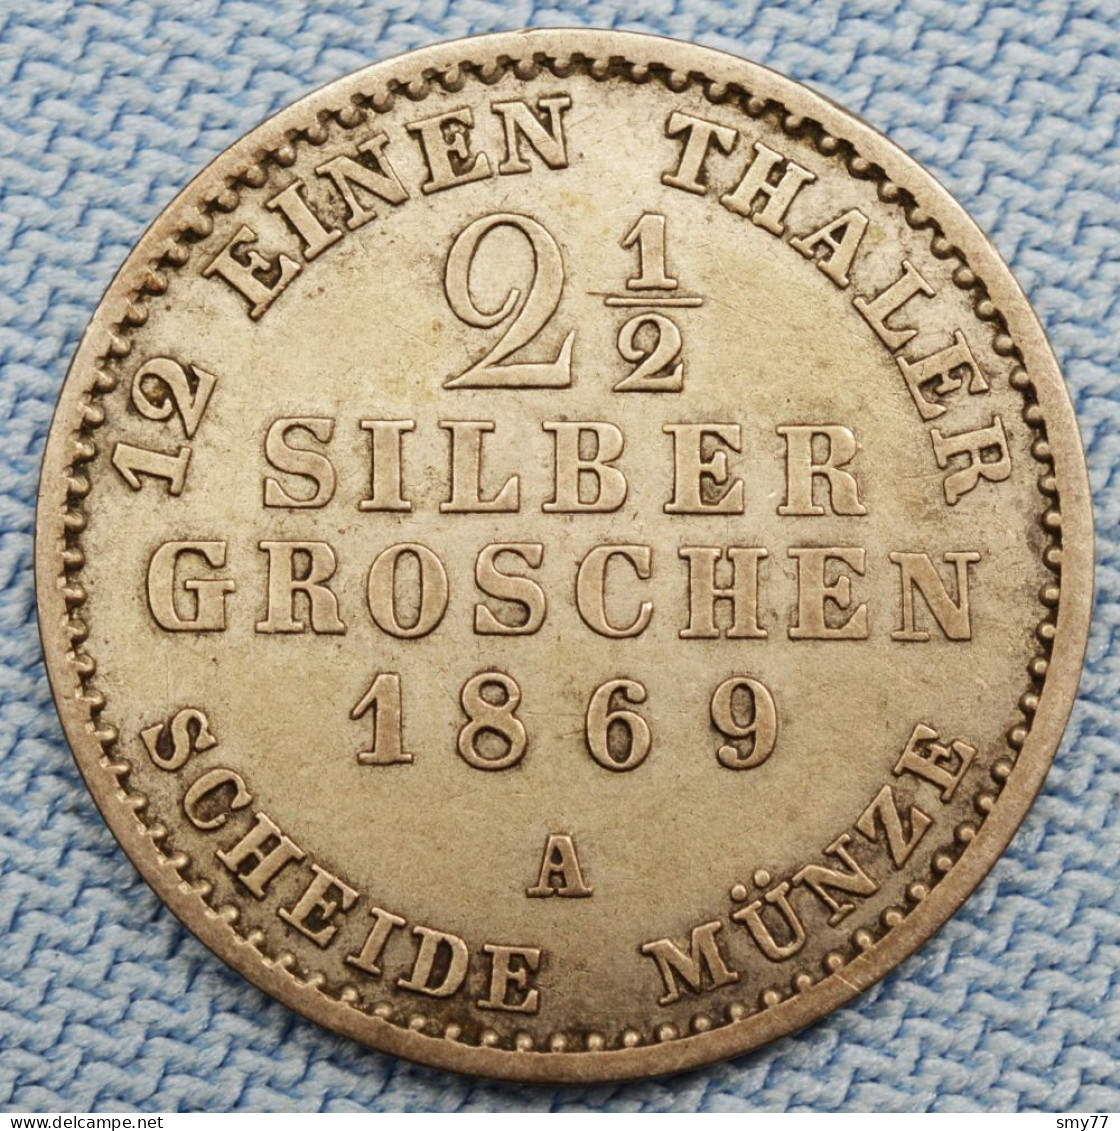 Preussen / Prussia • 2 1/2 Groschen 1869 A • Wilhelm I •  German States / Allemagne États / Prusse • [24-640] - Small Coins & Other Subdivisions